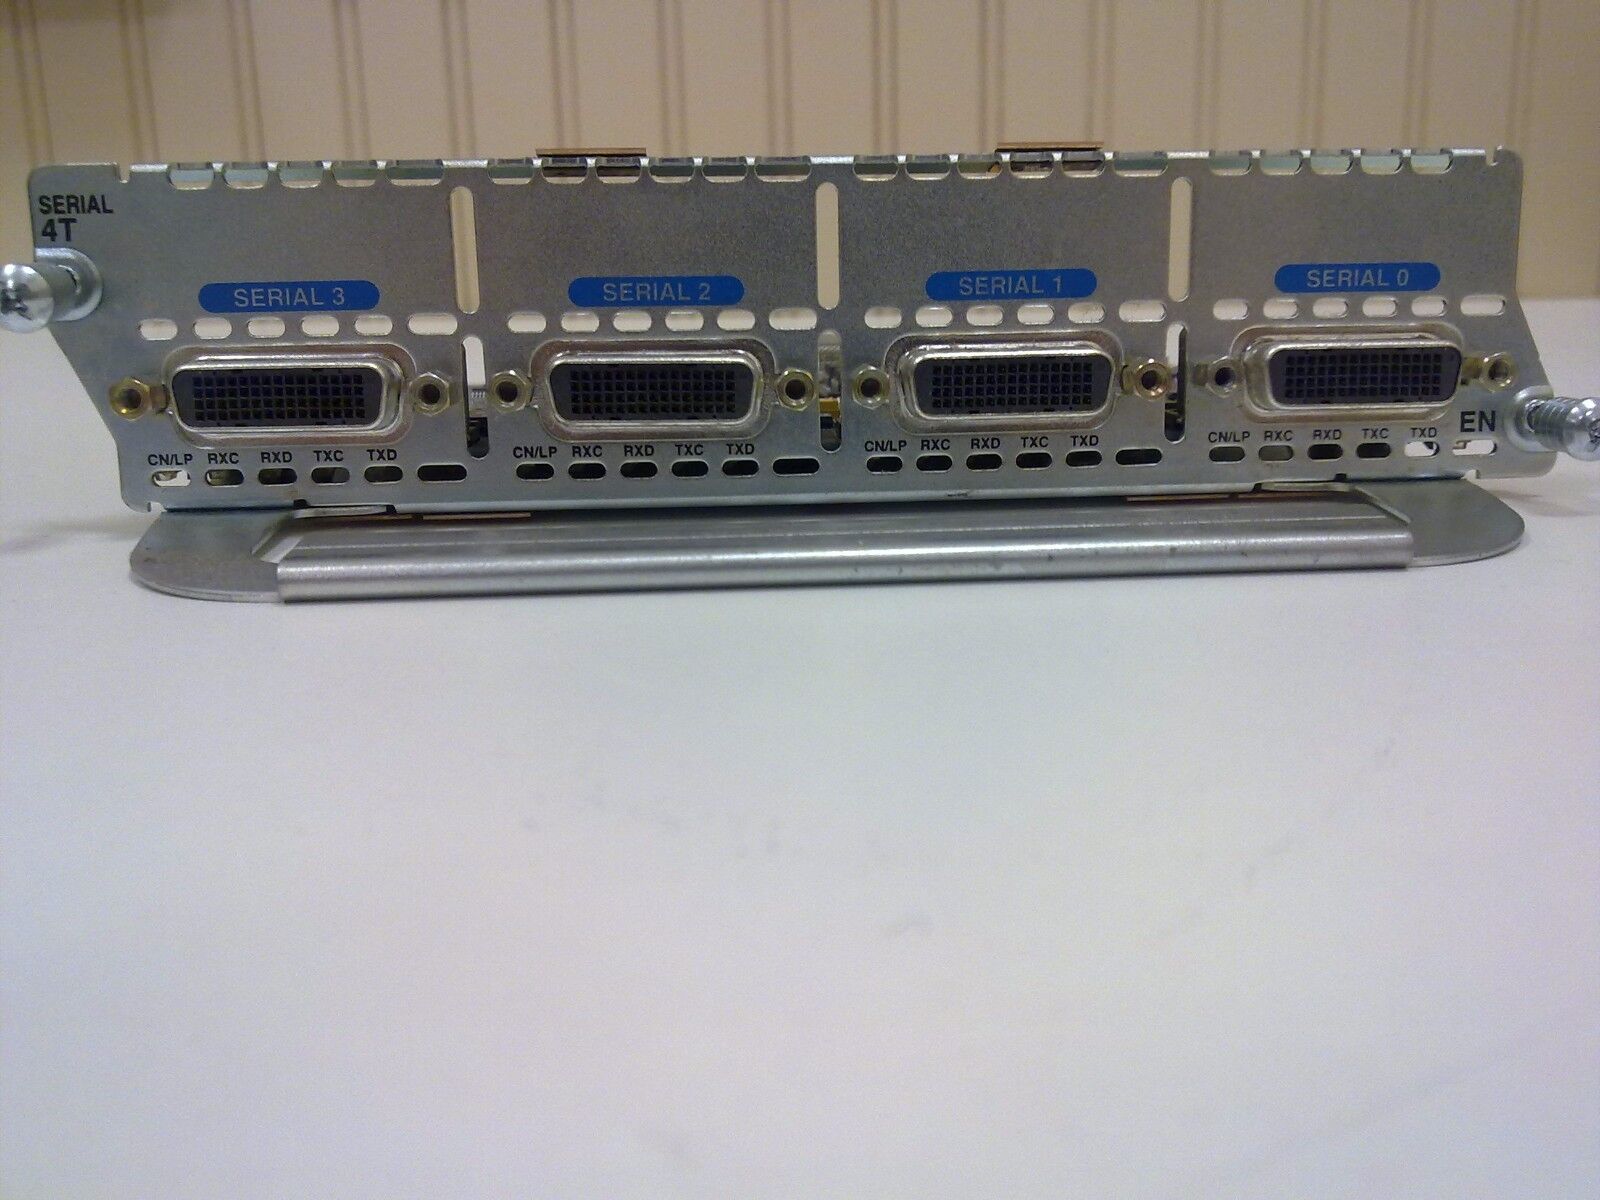 CISCO NM-4T 4-PORT SERIAL Synchronous Module 4T for Cisco Router SERIAL 4T